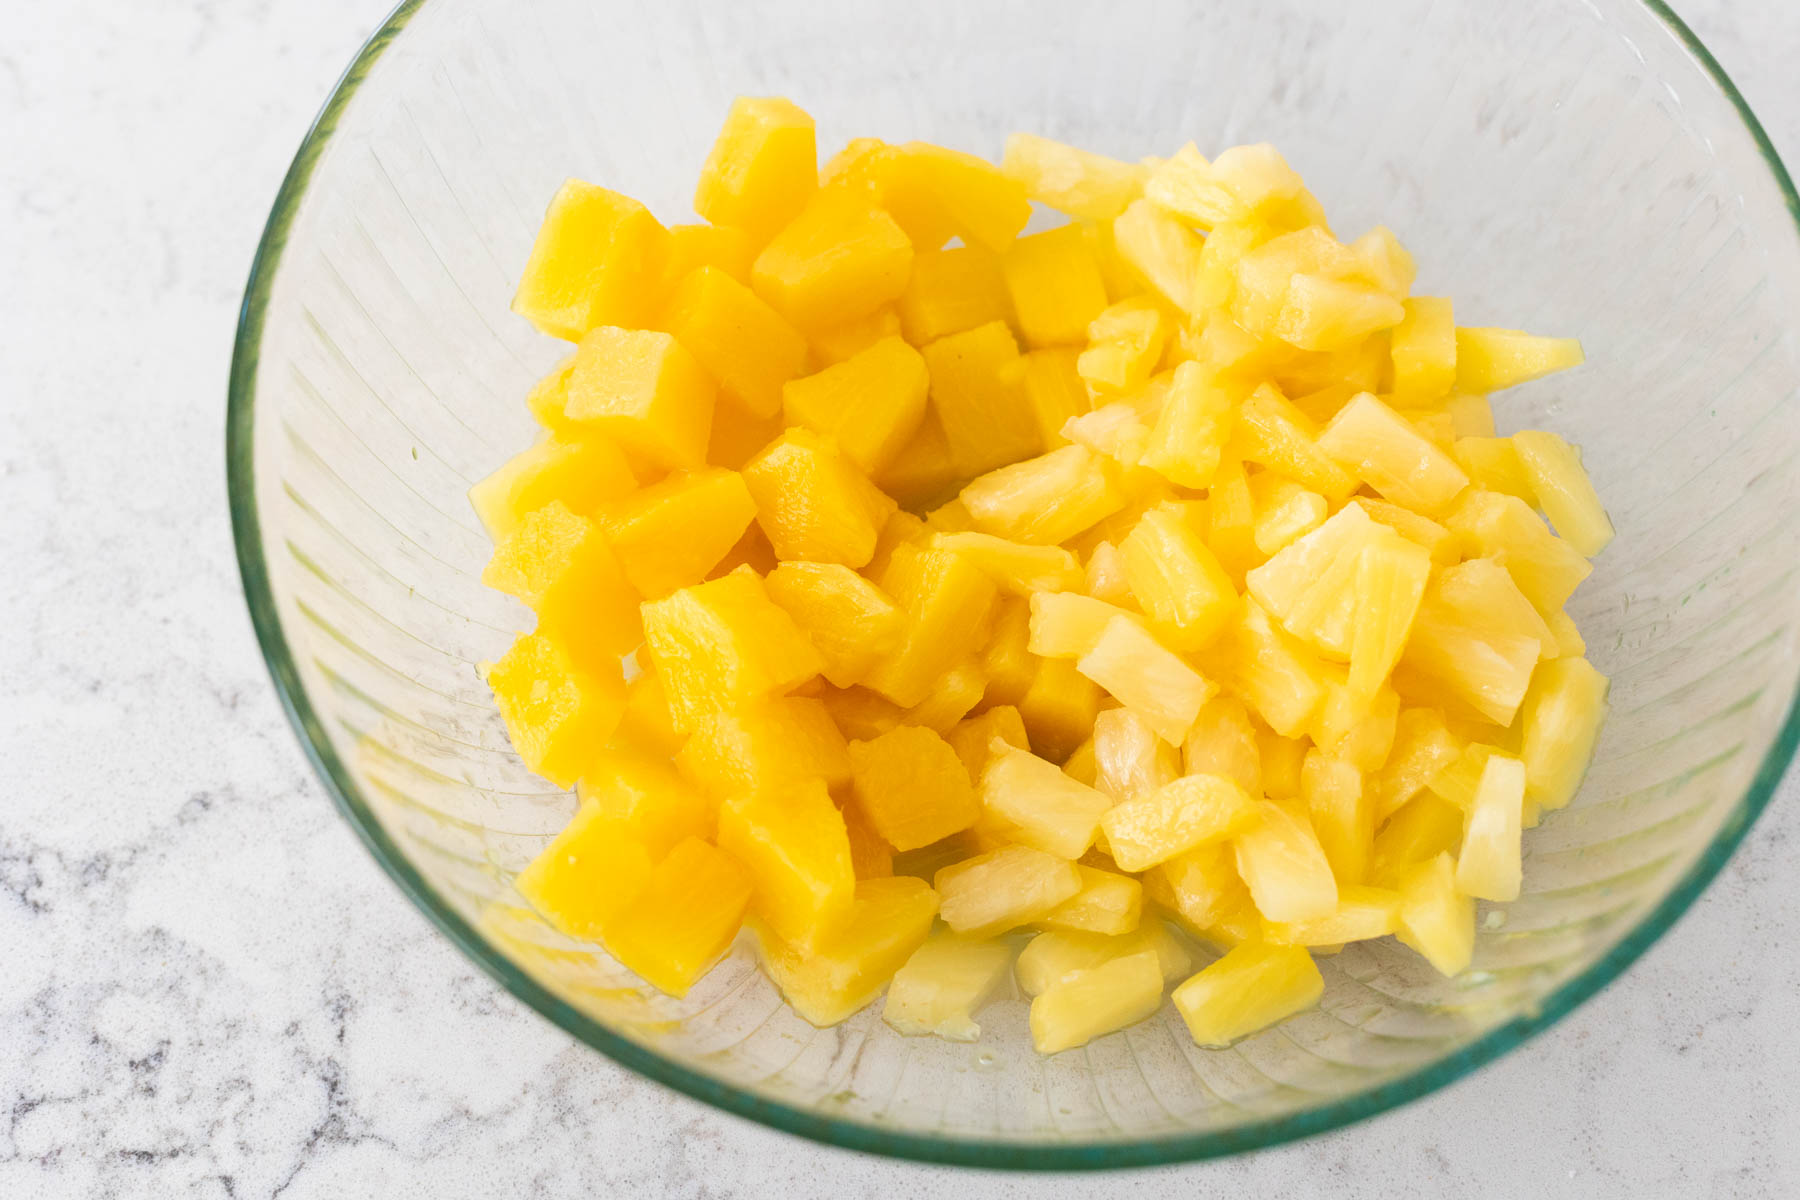 A mixing bowl is filled with canned pineapple. The pineapple chunks are on the left, the pineapple tidbits are on the right.